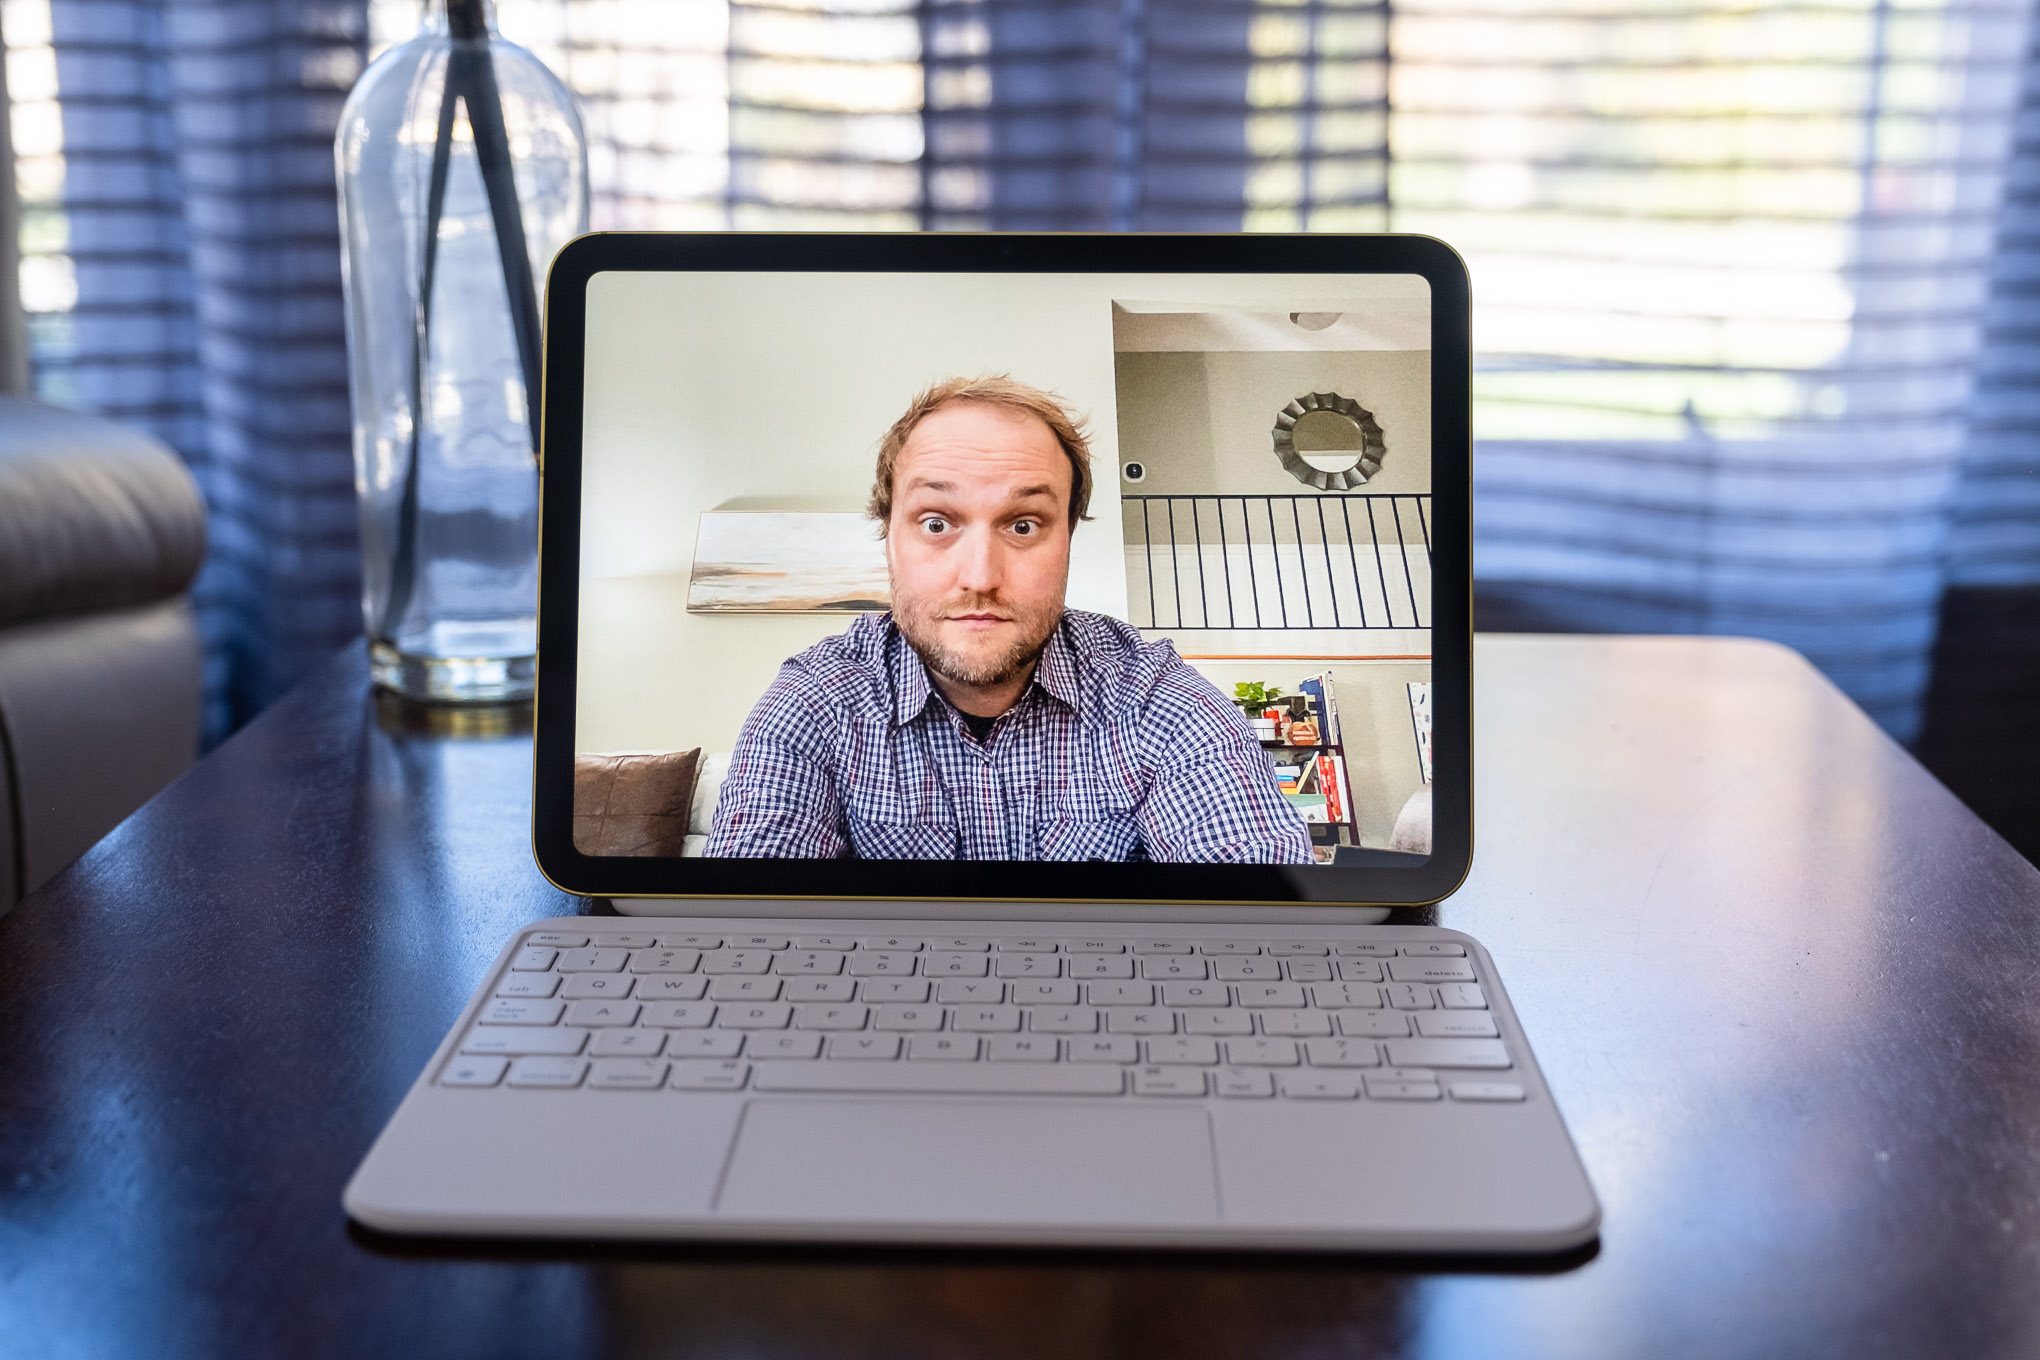 A 10th gen iPad in a Magic Keyboard Folio with the camera app open showing the view from the front-facing camera.